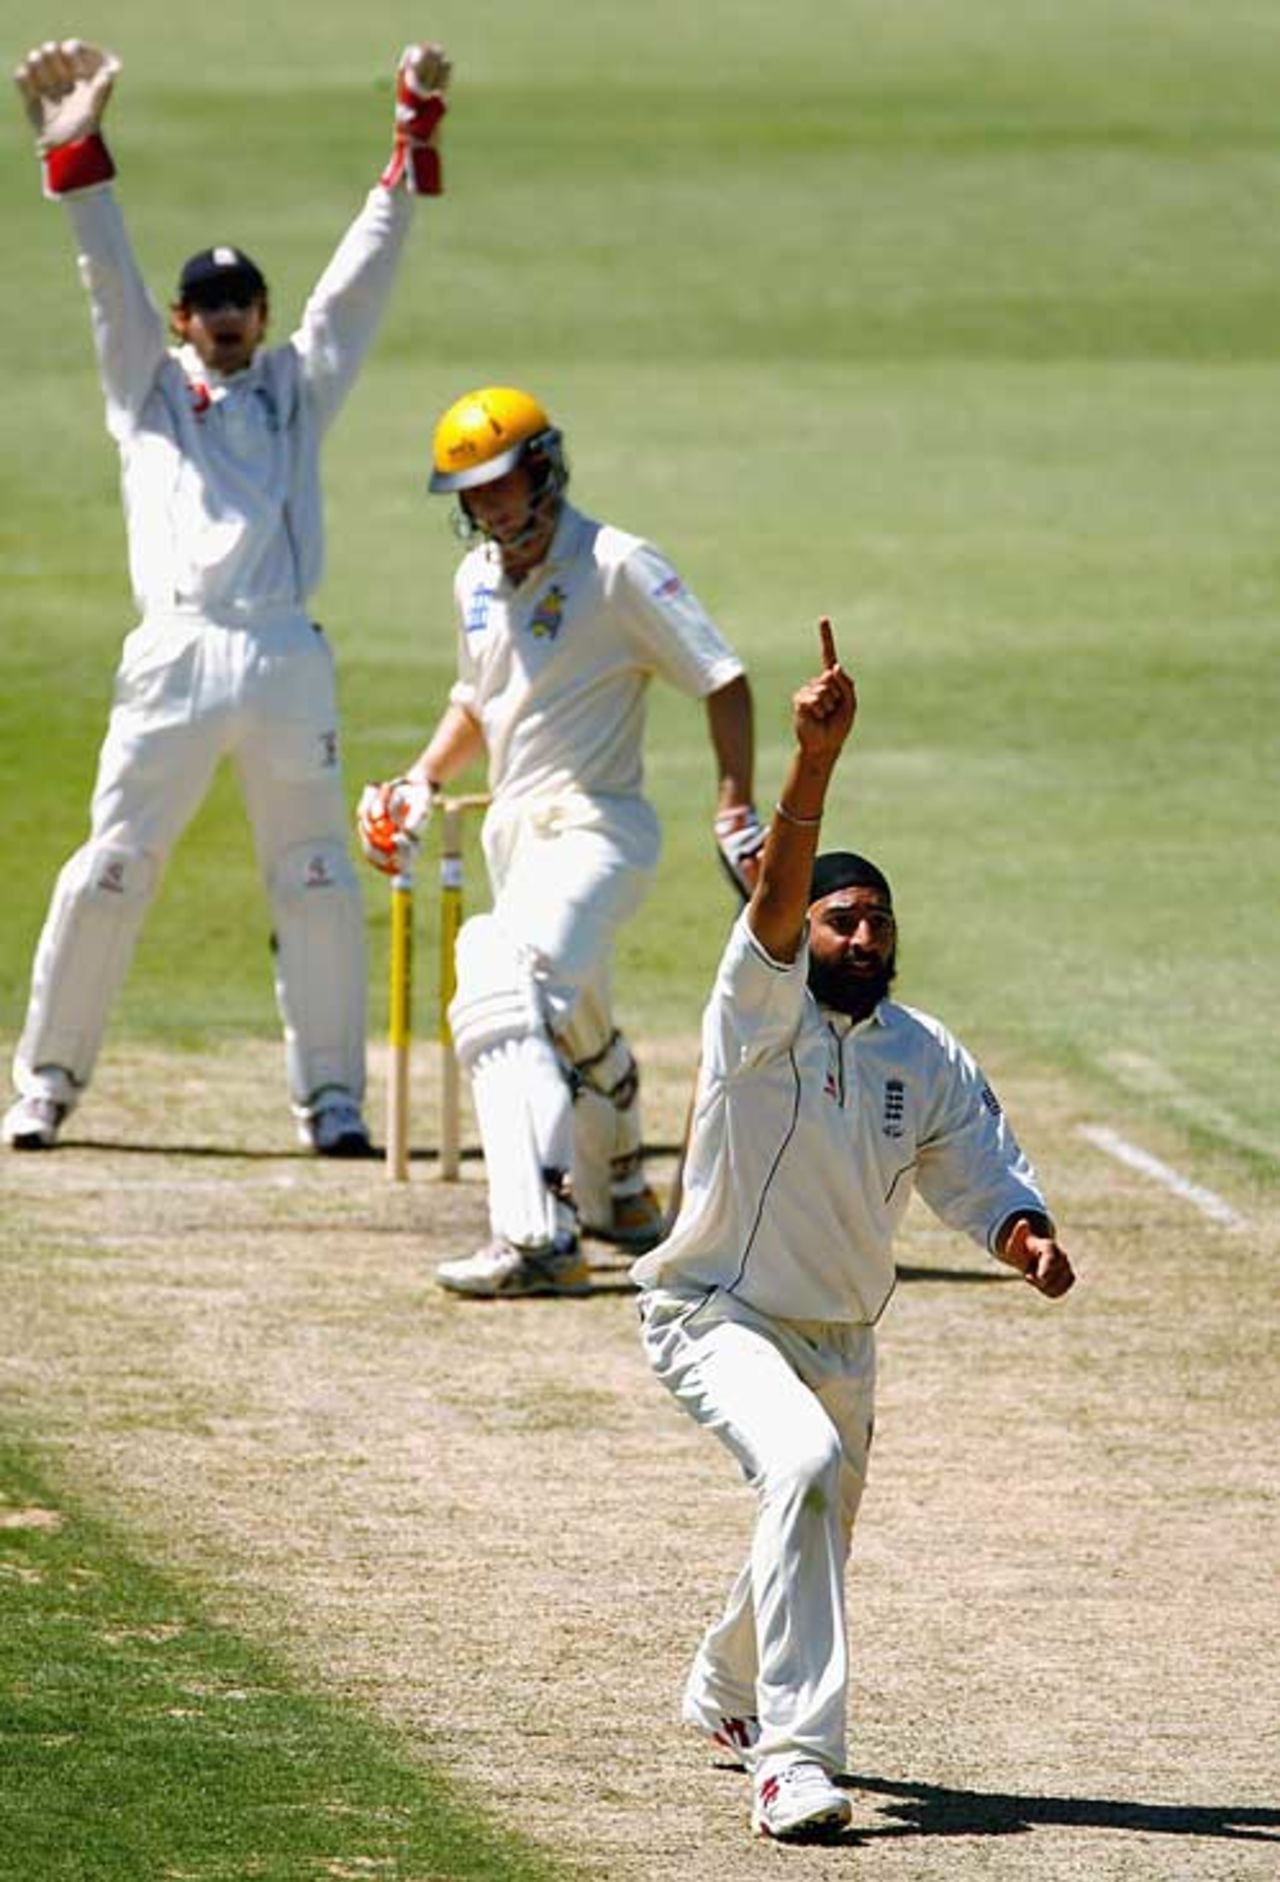 Monty Panesar has an appeal against Adam Voges turned down, Western Australia v England XI, Perth, December 9, 2006